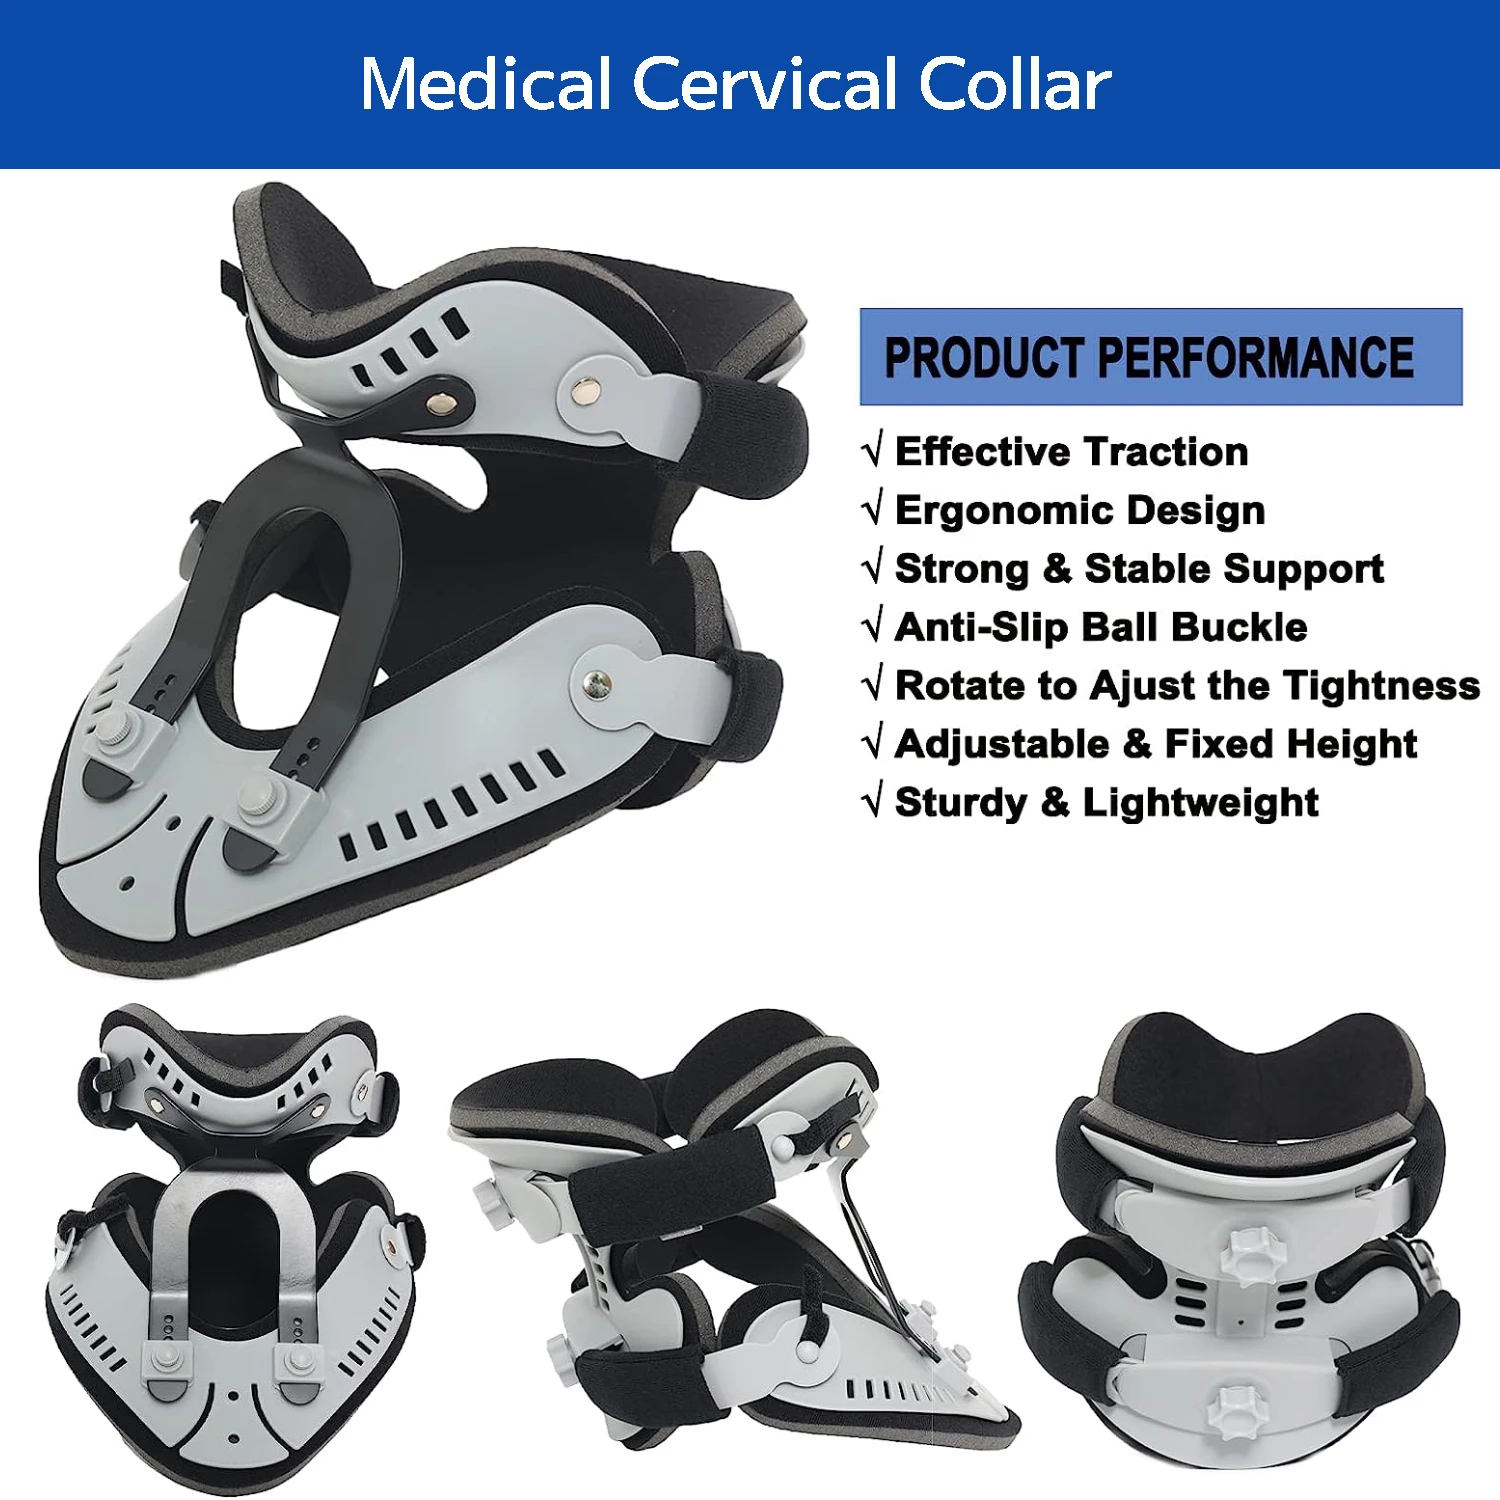 Adjustable Neck Brace Orthosis, Cervical Collar Support Stabilizes Vertebrae, Traction Spine Alignment, Relieves Pain & Pressure